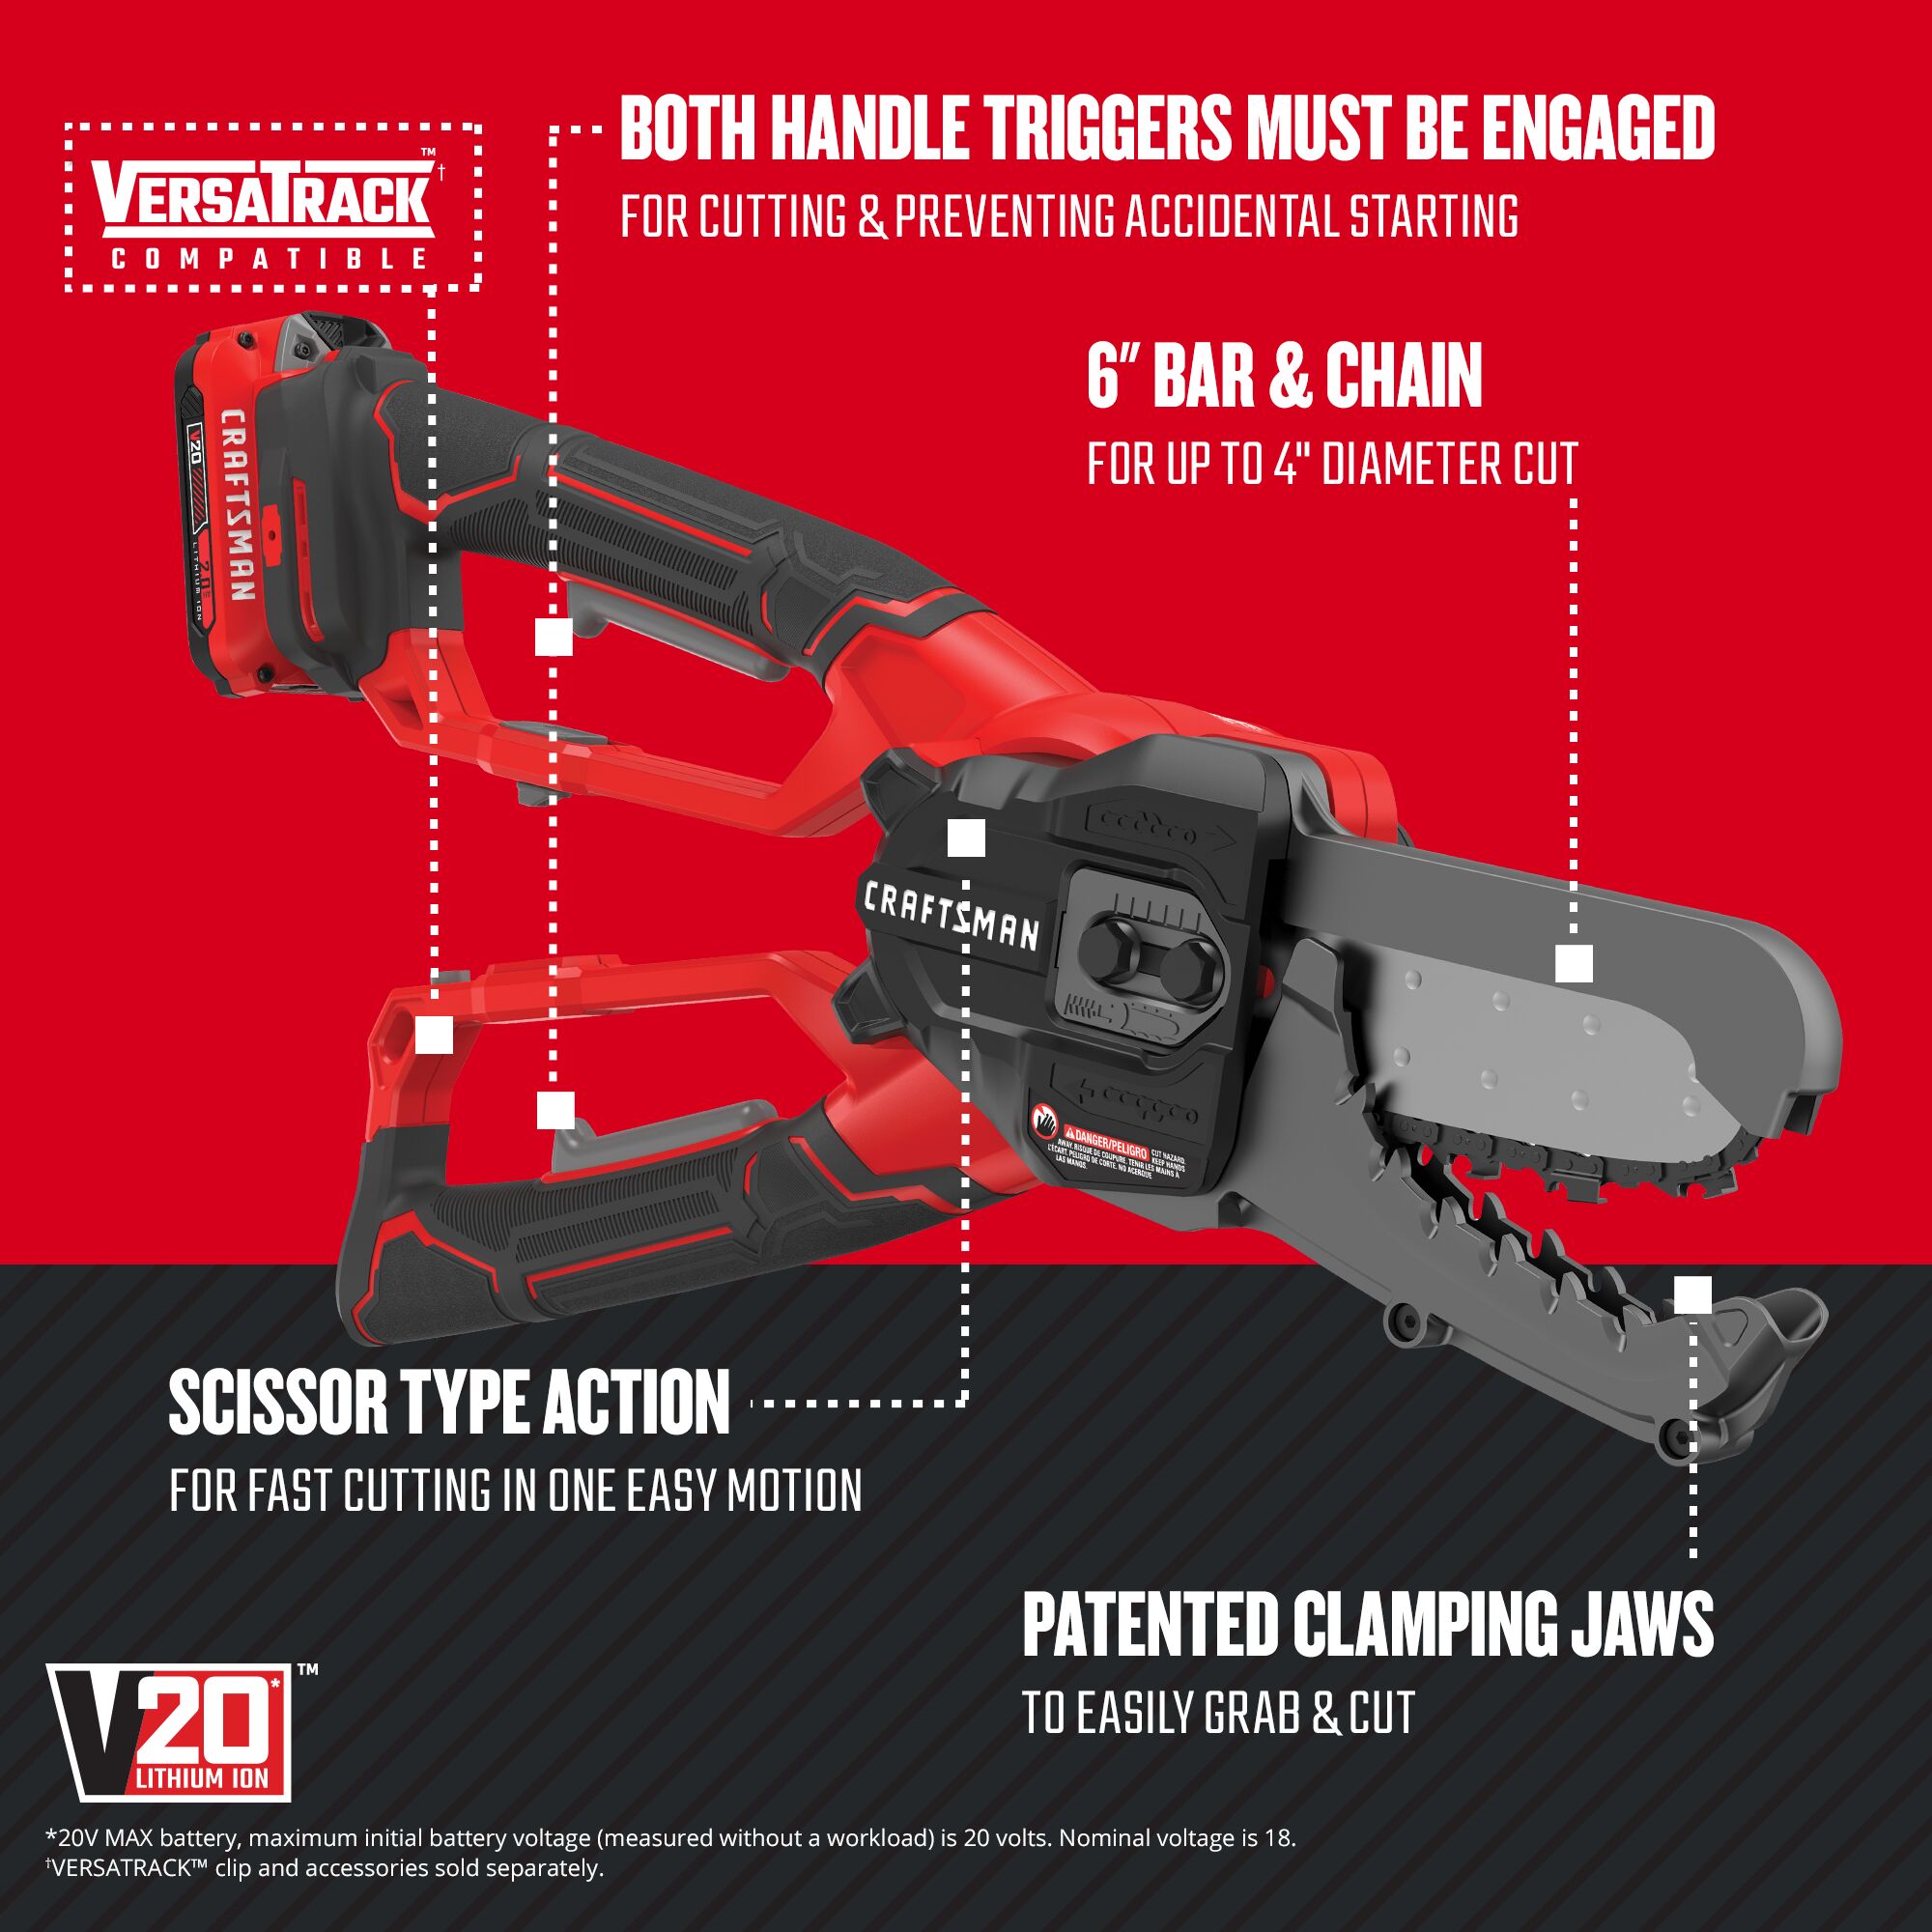 Graphic of CRAFTSMAN Loppers highlighting product features